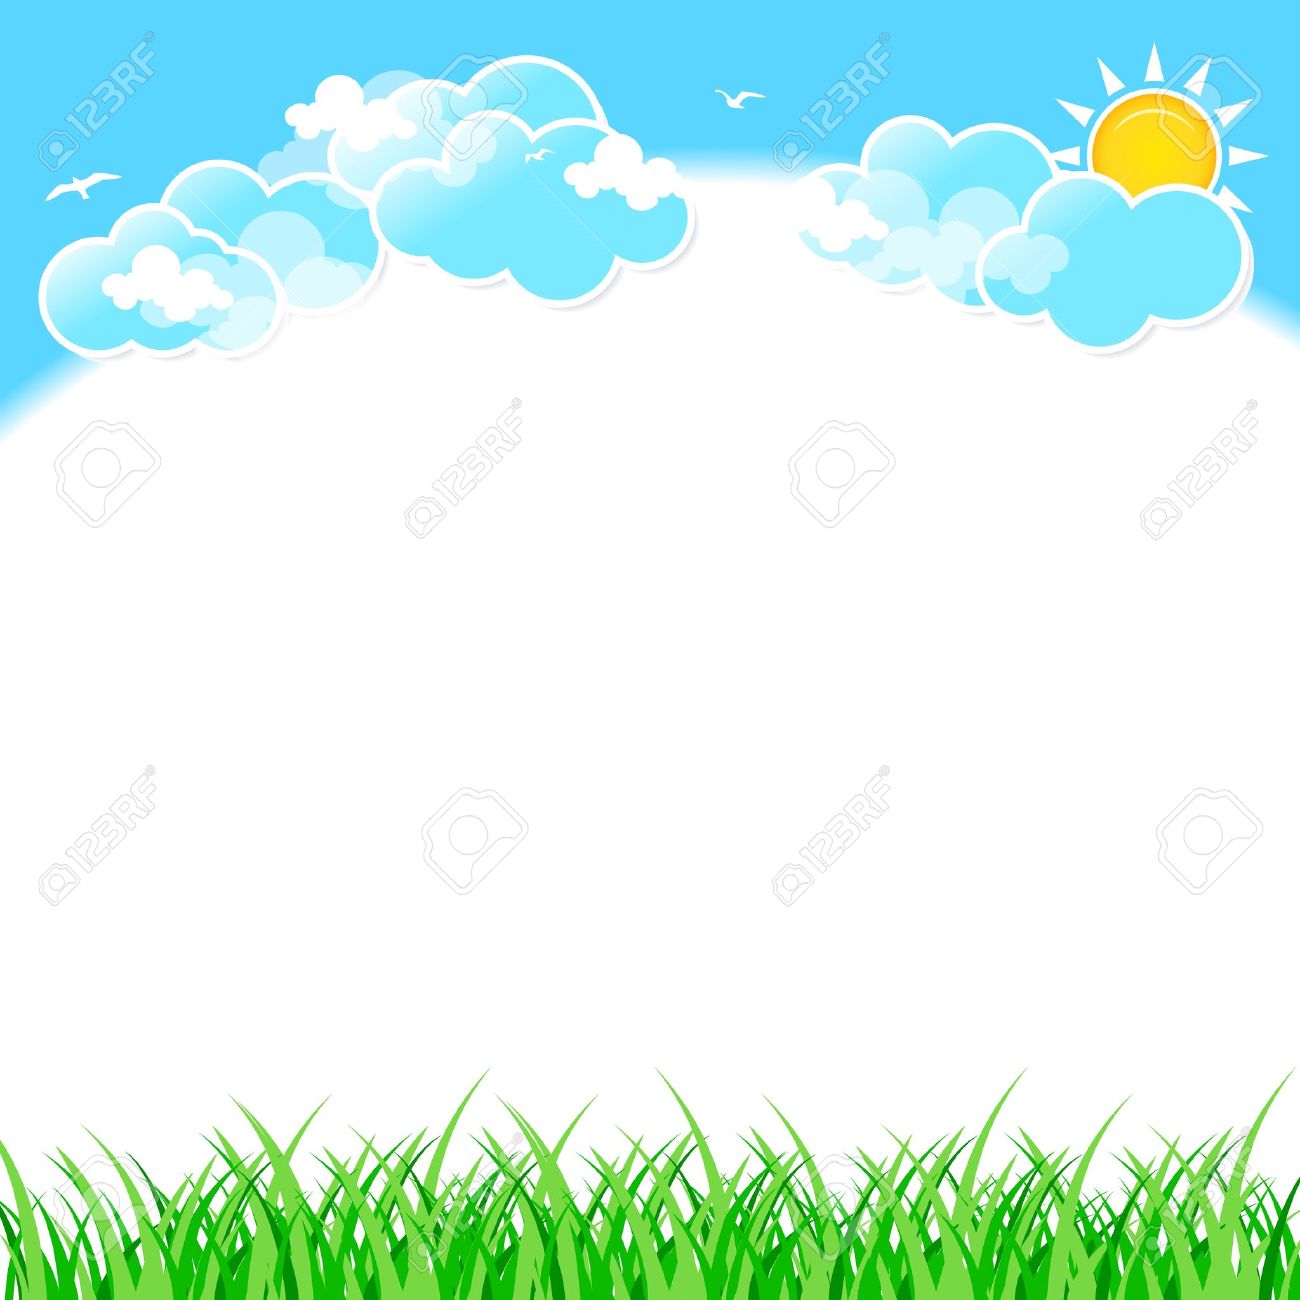 Sky background clipart.